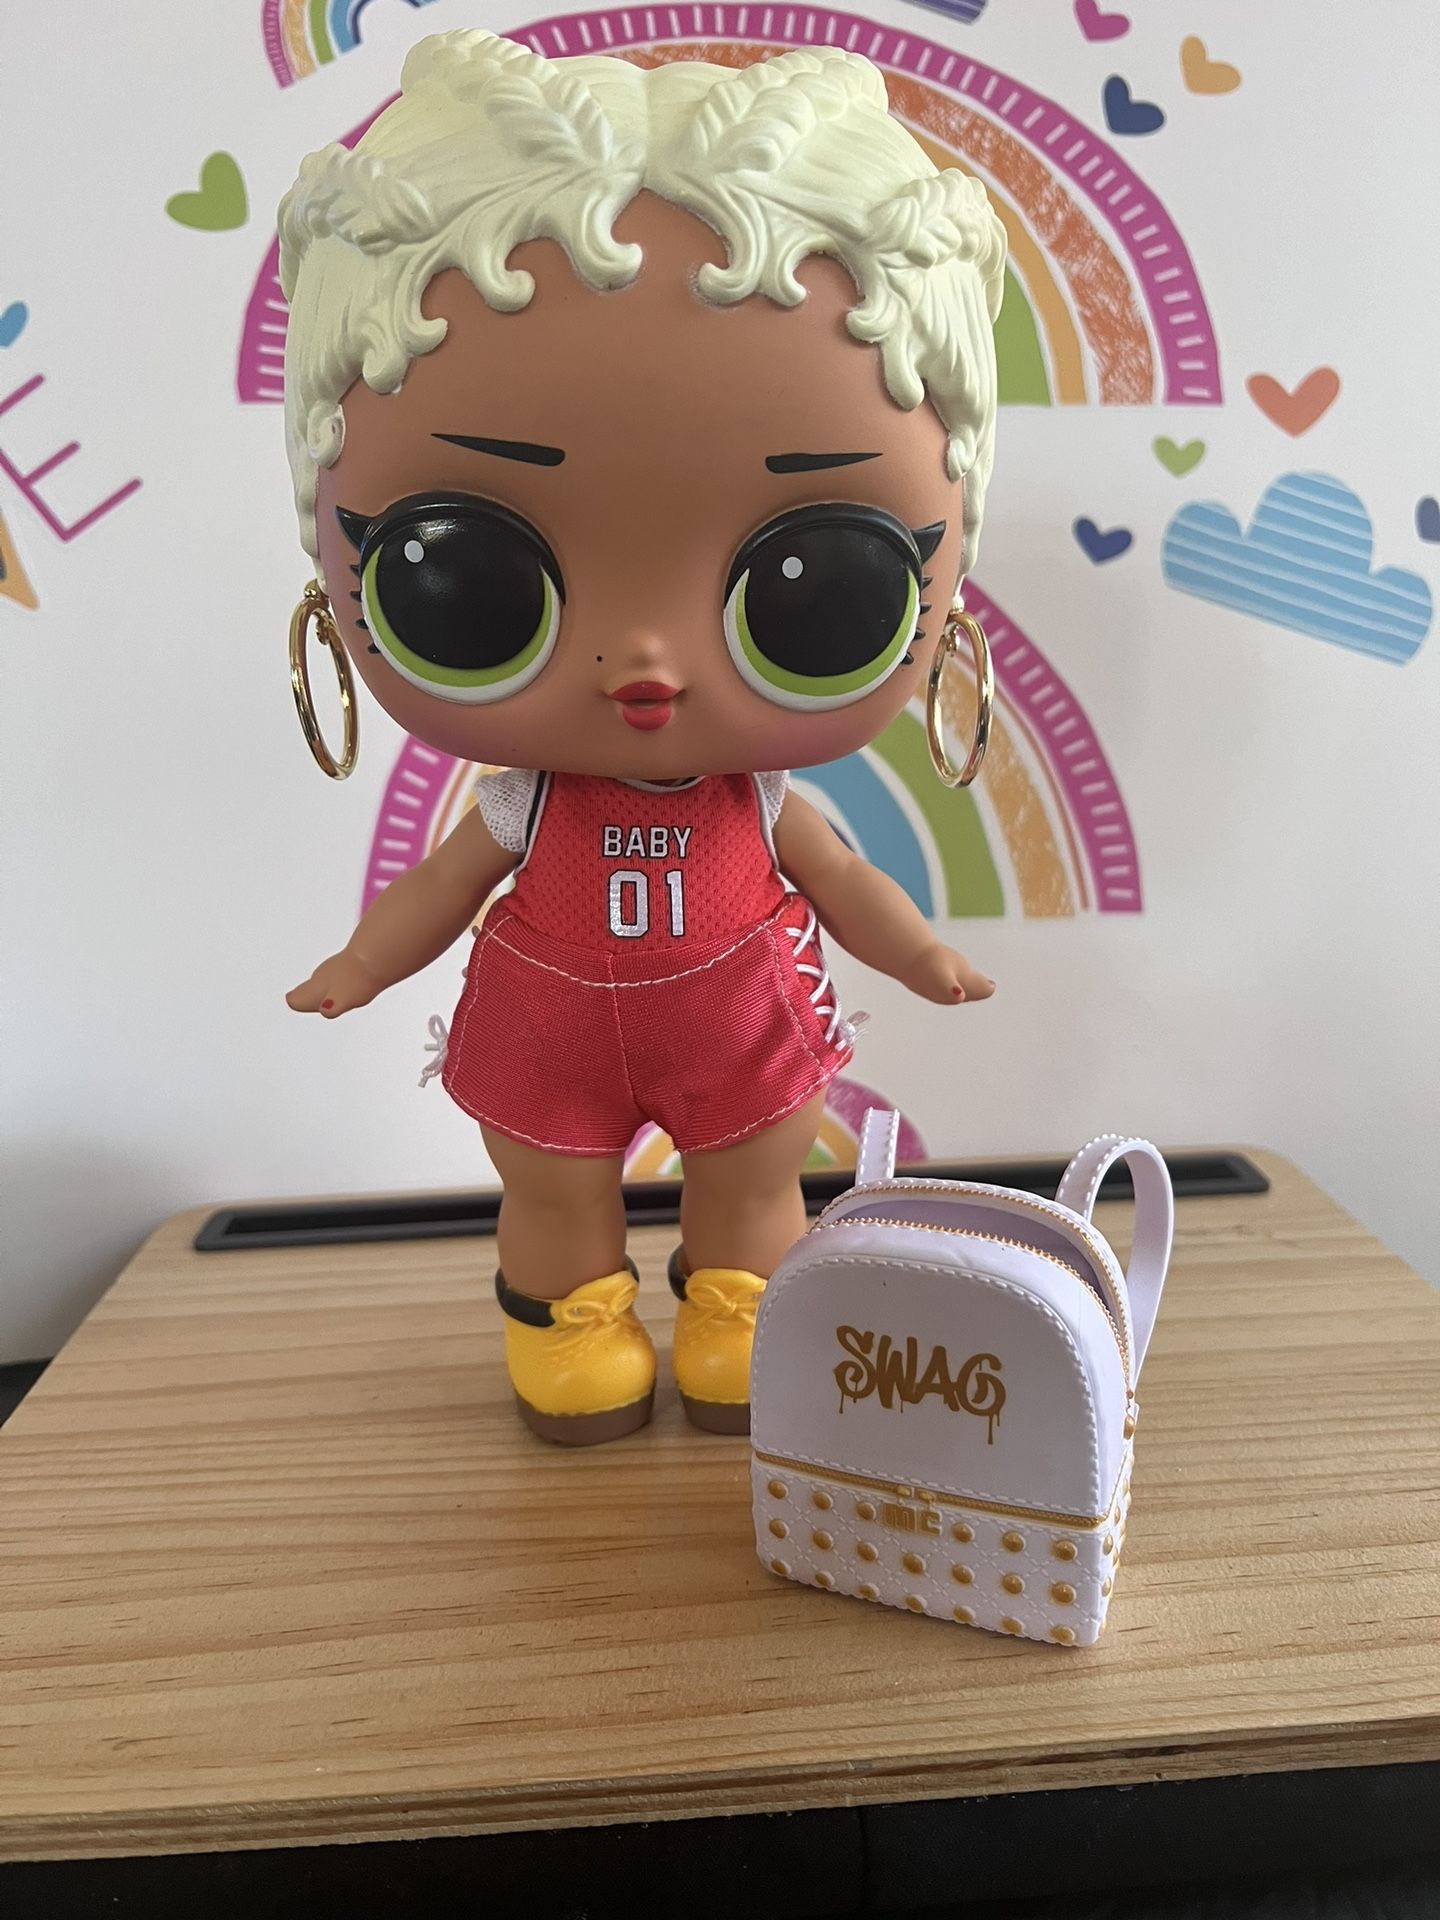 LOL DOLL - MGA SWAG -  LARGE 11 INCH HEAVY DOLL WITH HER BACKPACK!